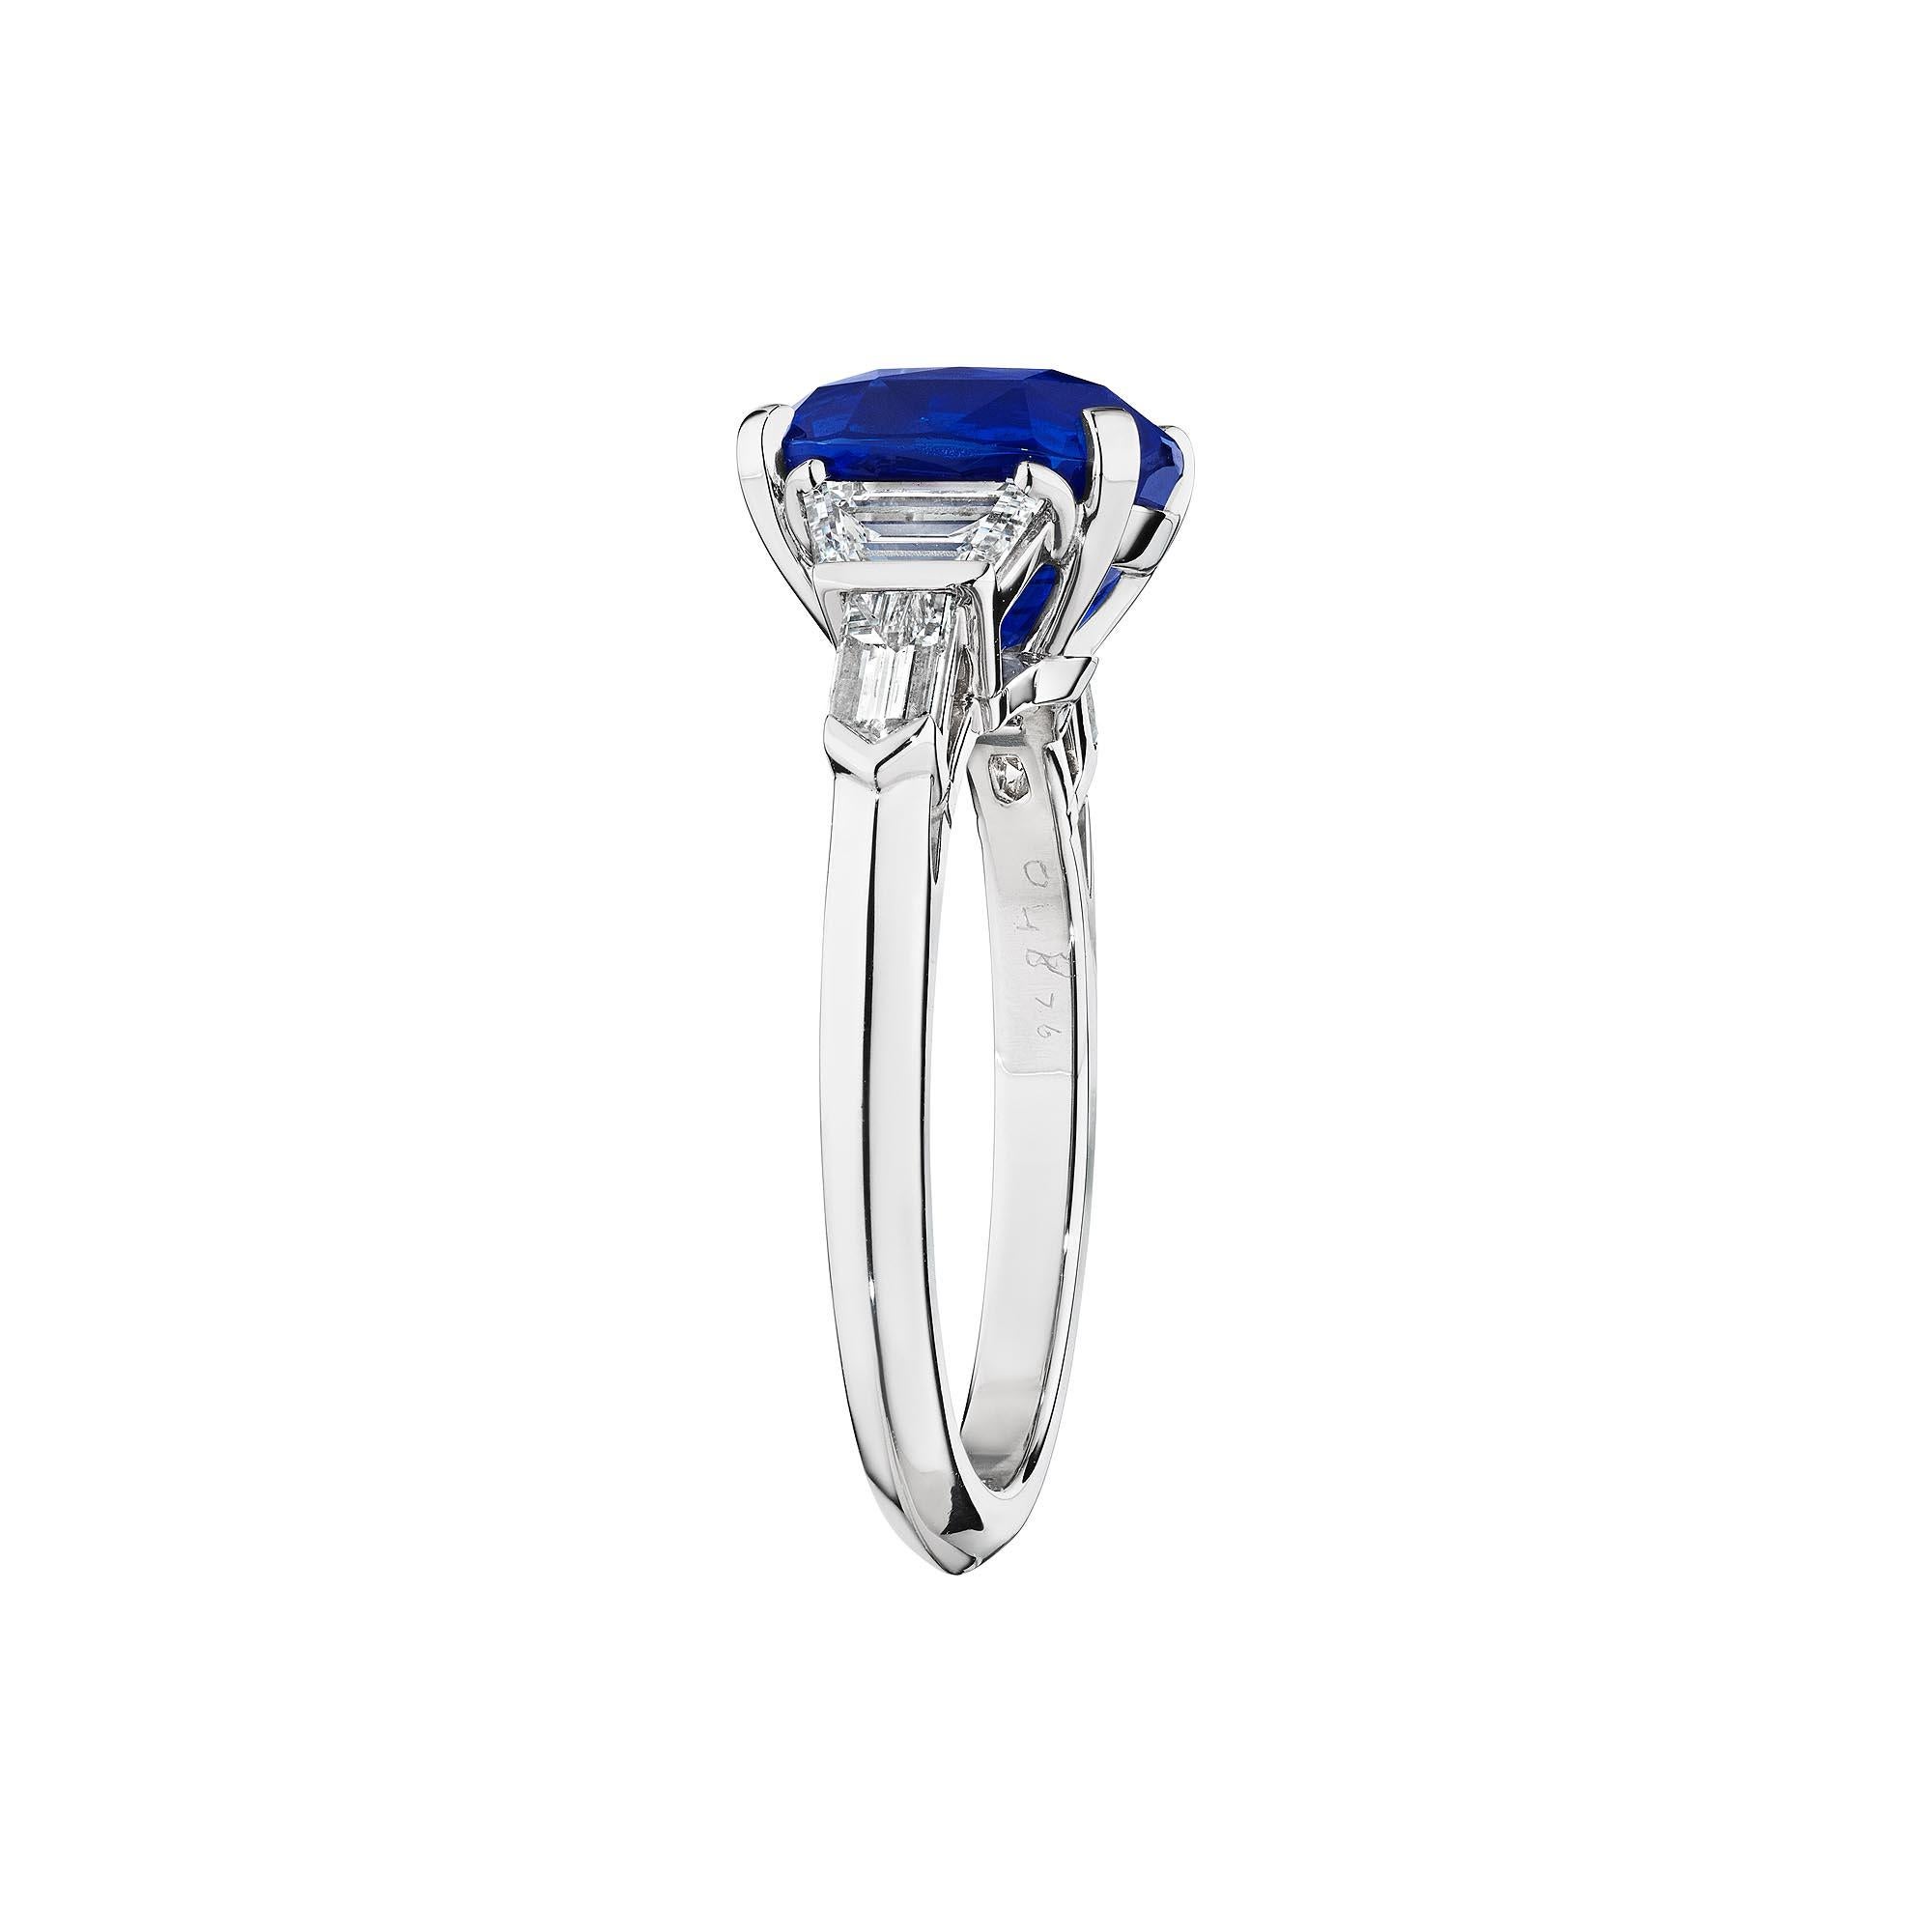 A vibrant velvety blue natural no heat certified 4.01 cushion cut AGL certified sapphire is the eye-catching centerpiece of this extraordinary Raymond C. Yard platinum ring.  With a stunning combination of bullet and trapezoid cut side diamonds,